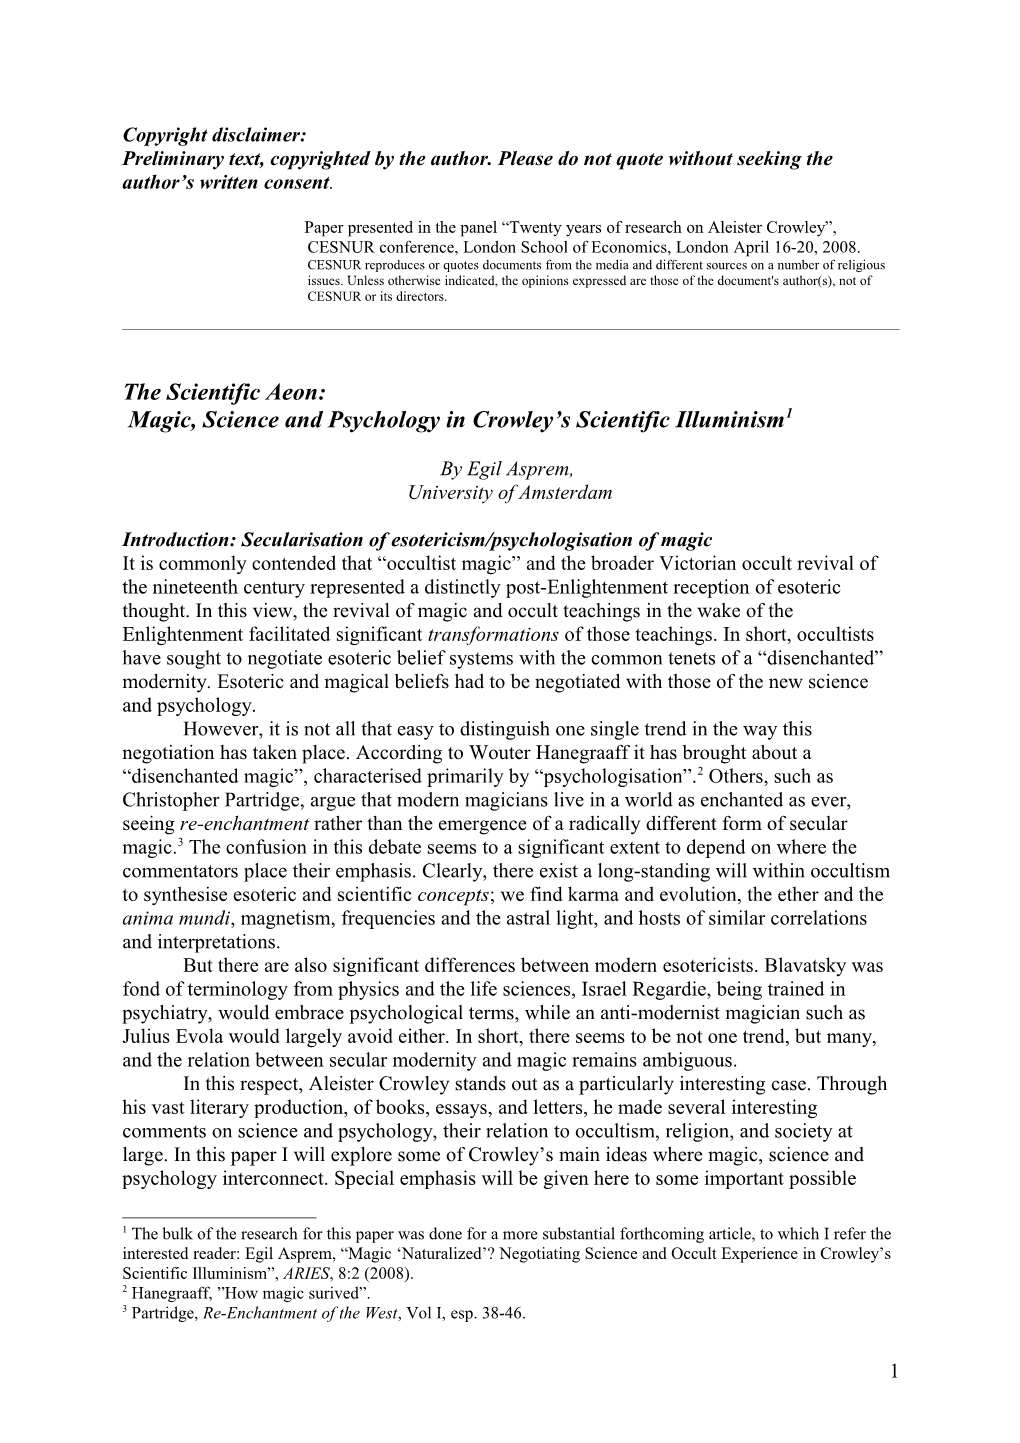 The Scientific Aeon: Magic, Science and Psychology in Crowley S Scientific Illuminism